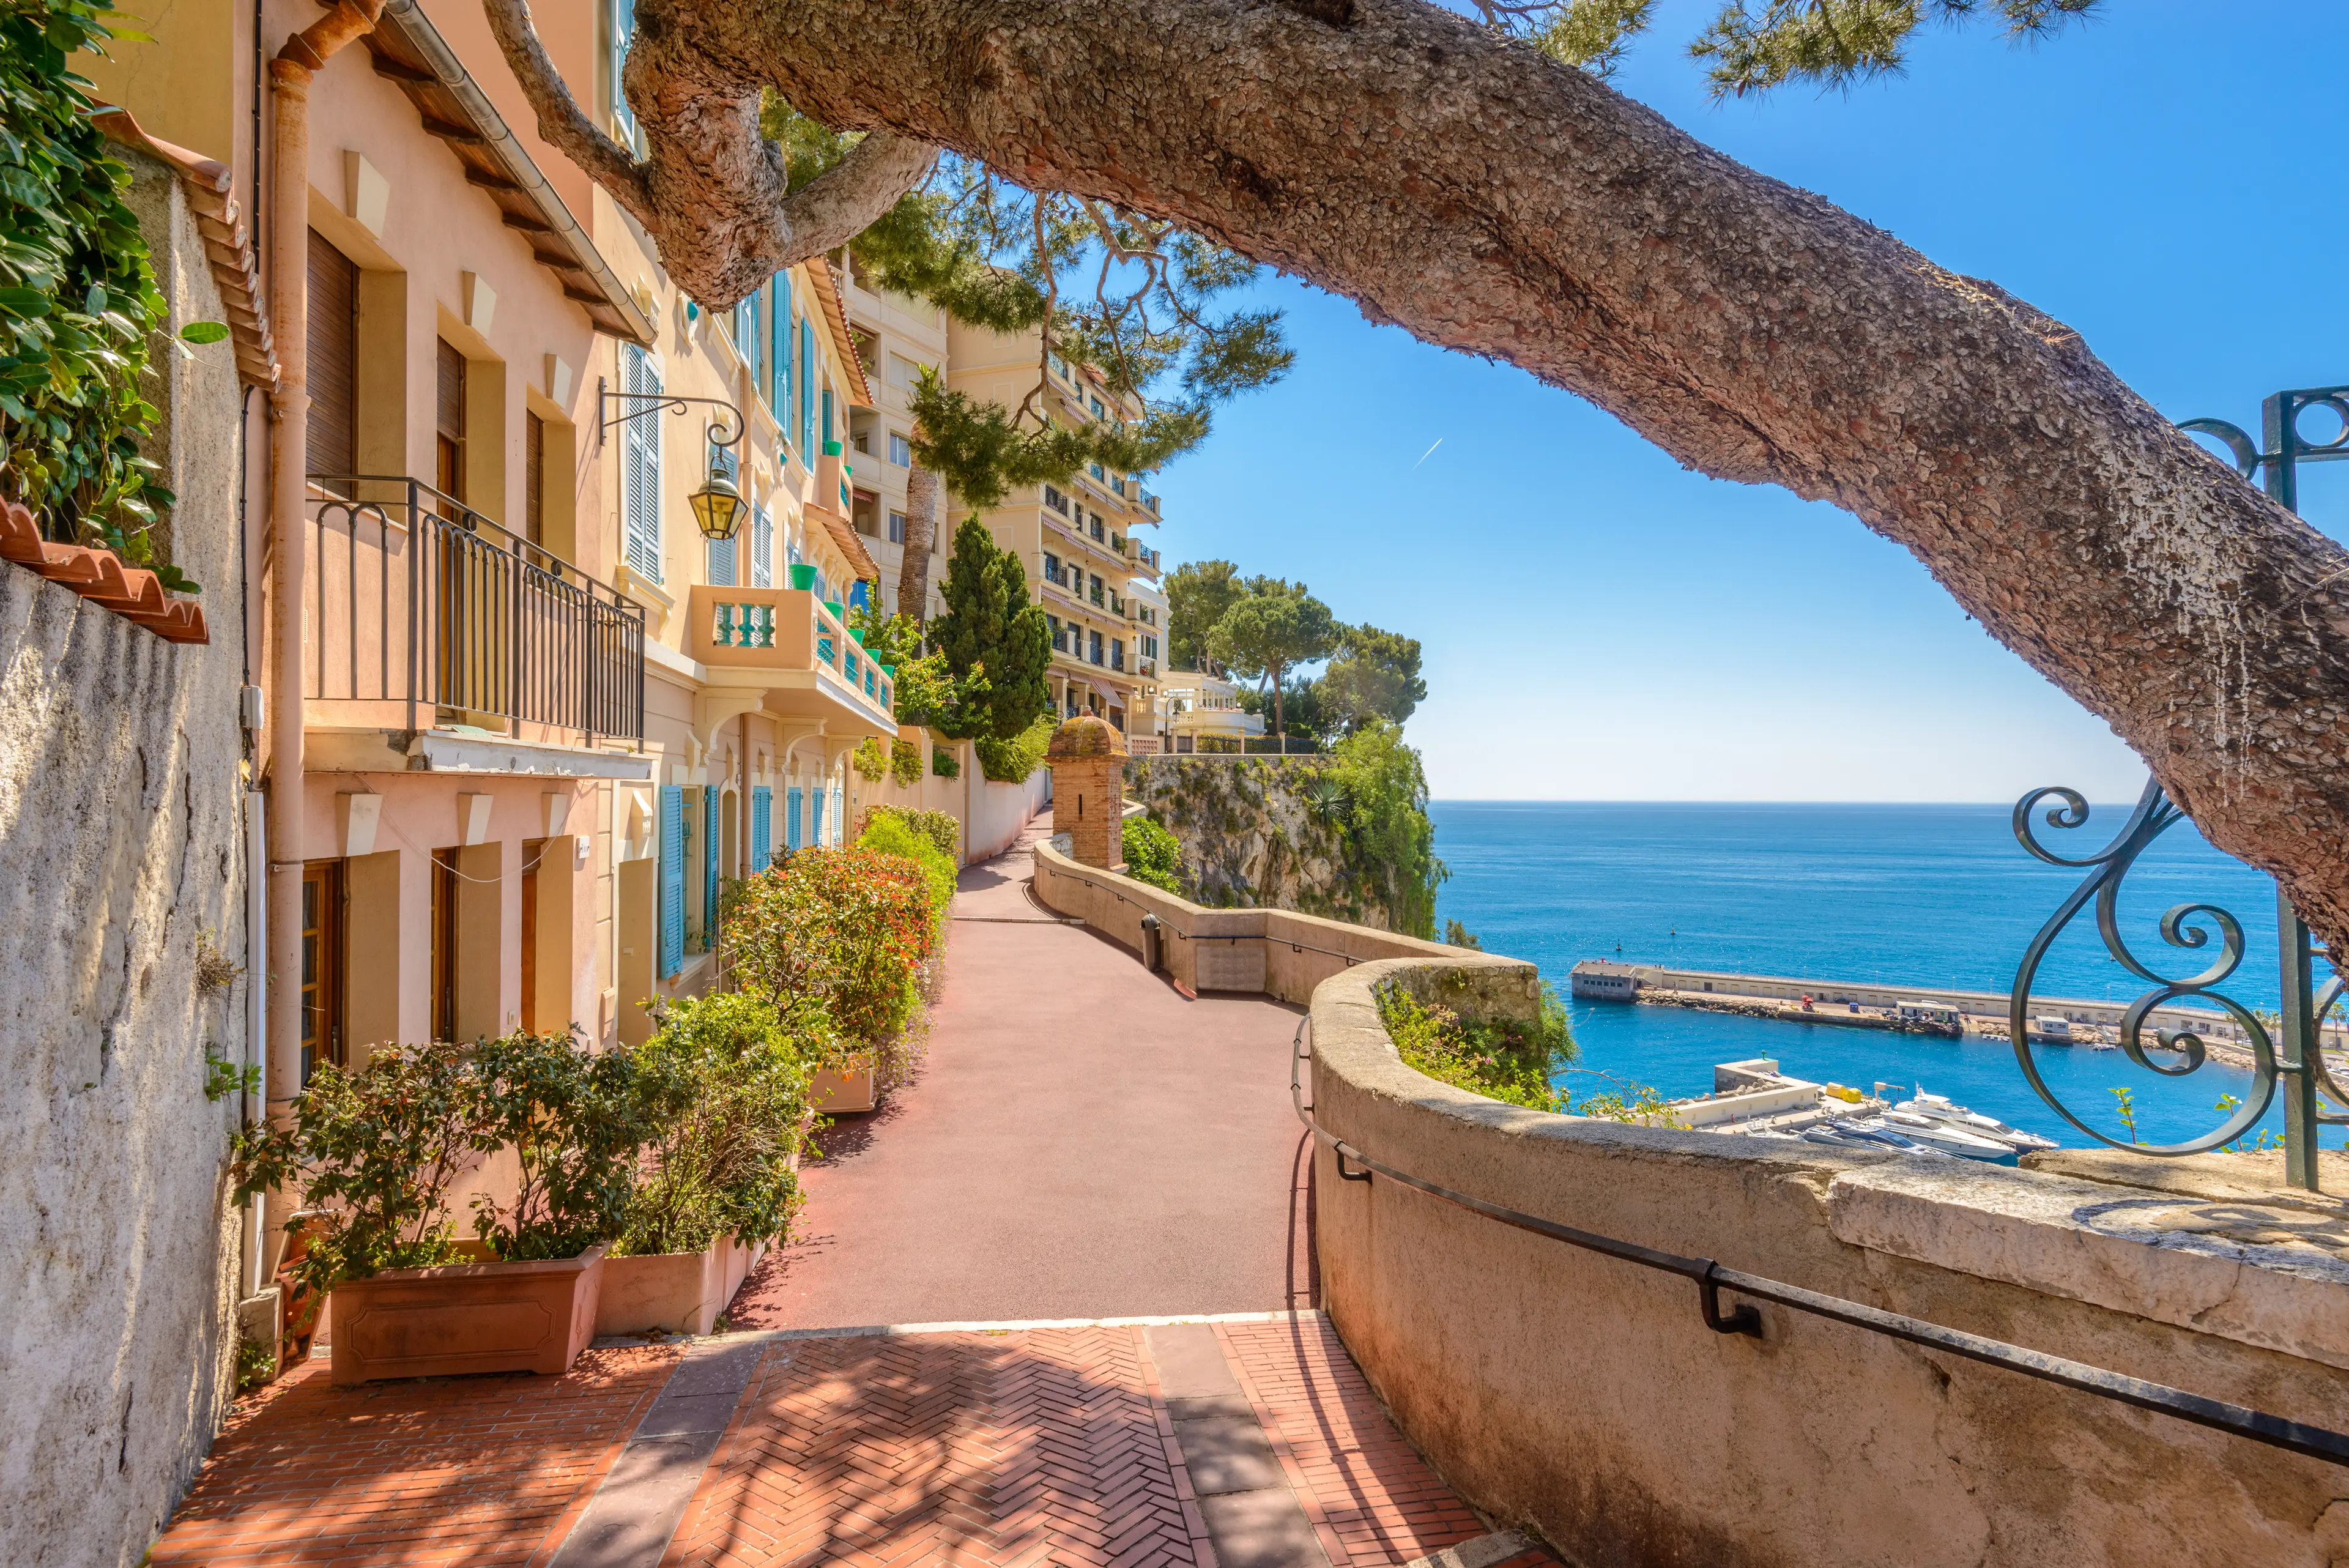 Discover Hidden Gems: A Day of Unusual Monaco Sightseeing & Activities